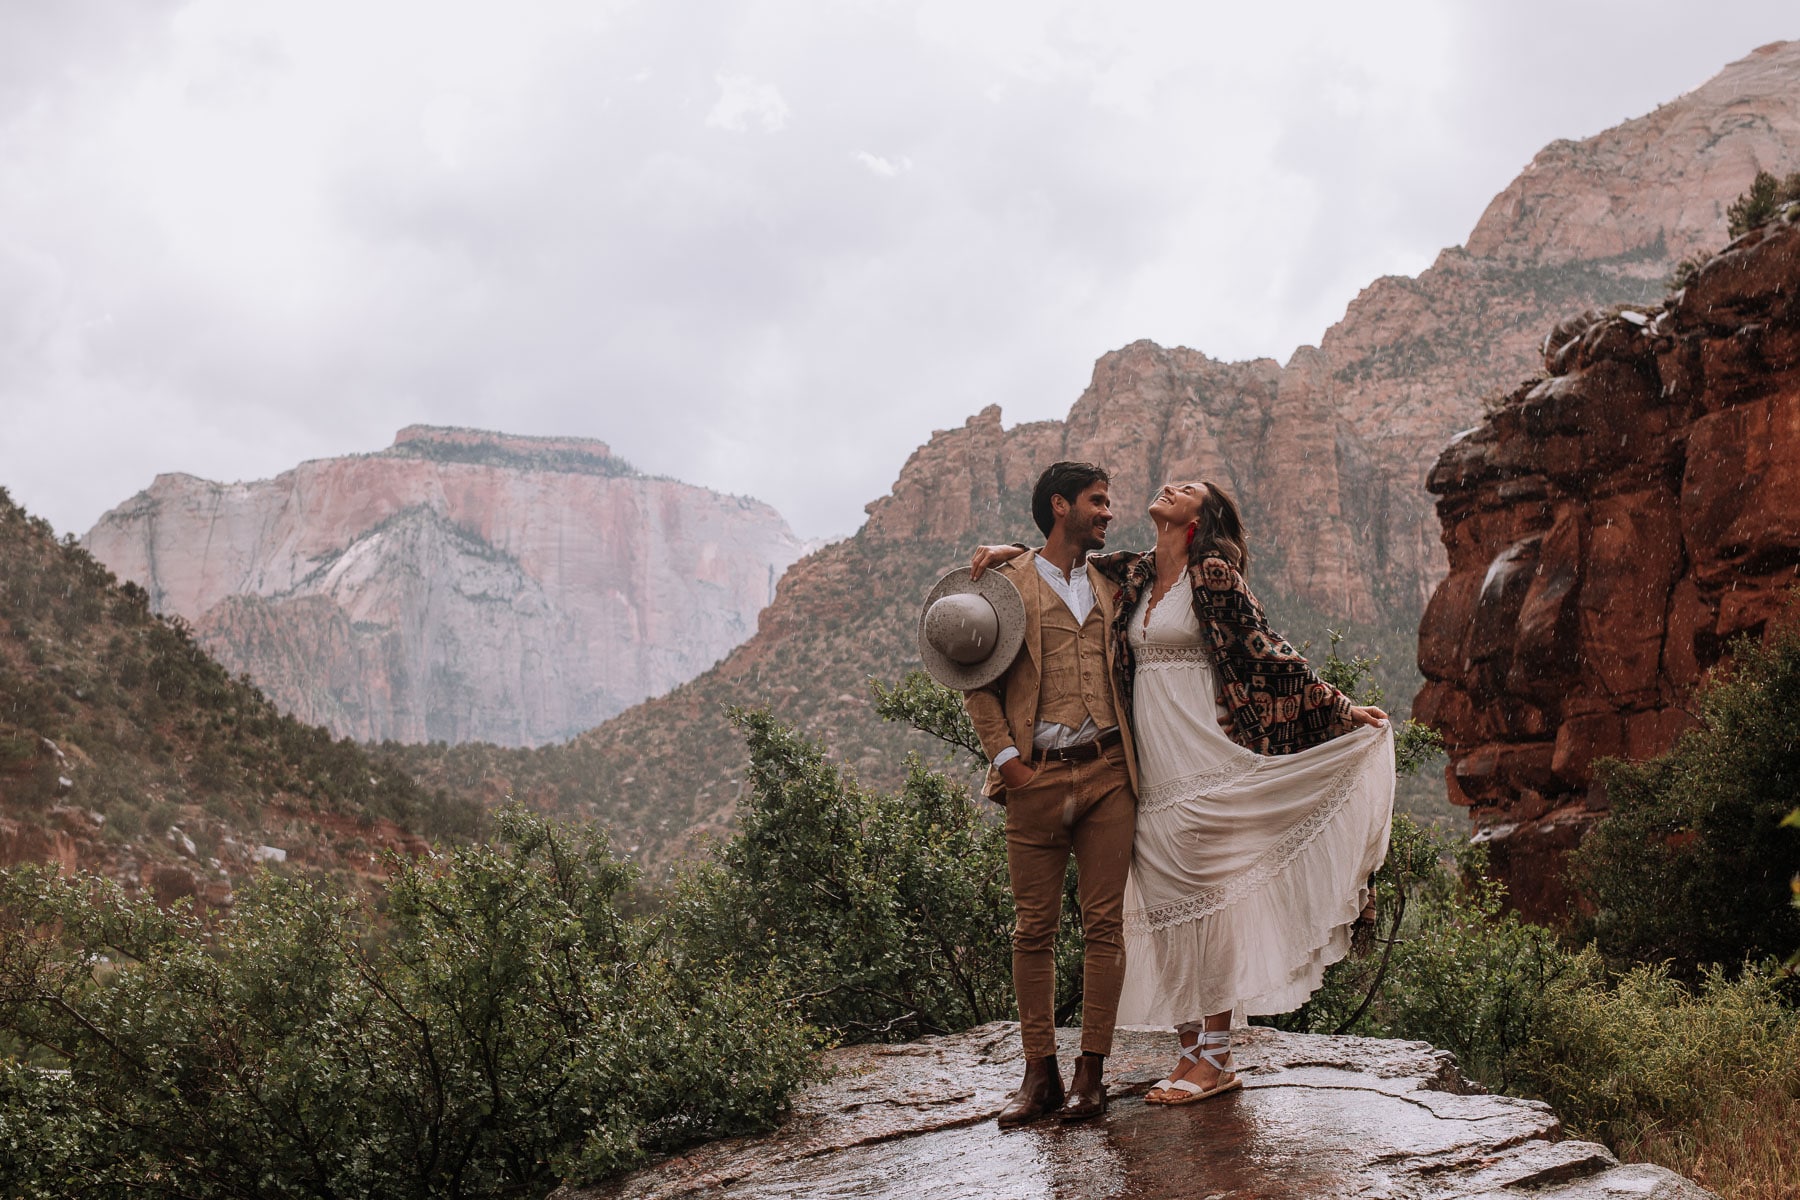 Why elope? Here is a guide to the differences between an adventure elopement and a regular wedding.